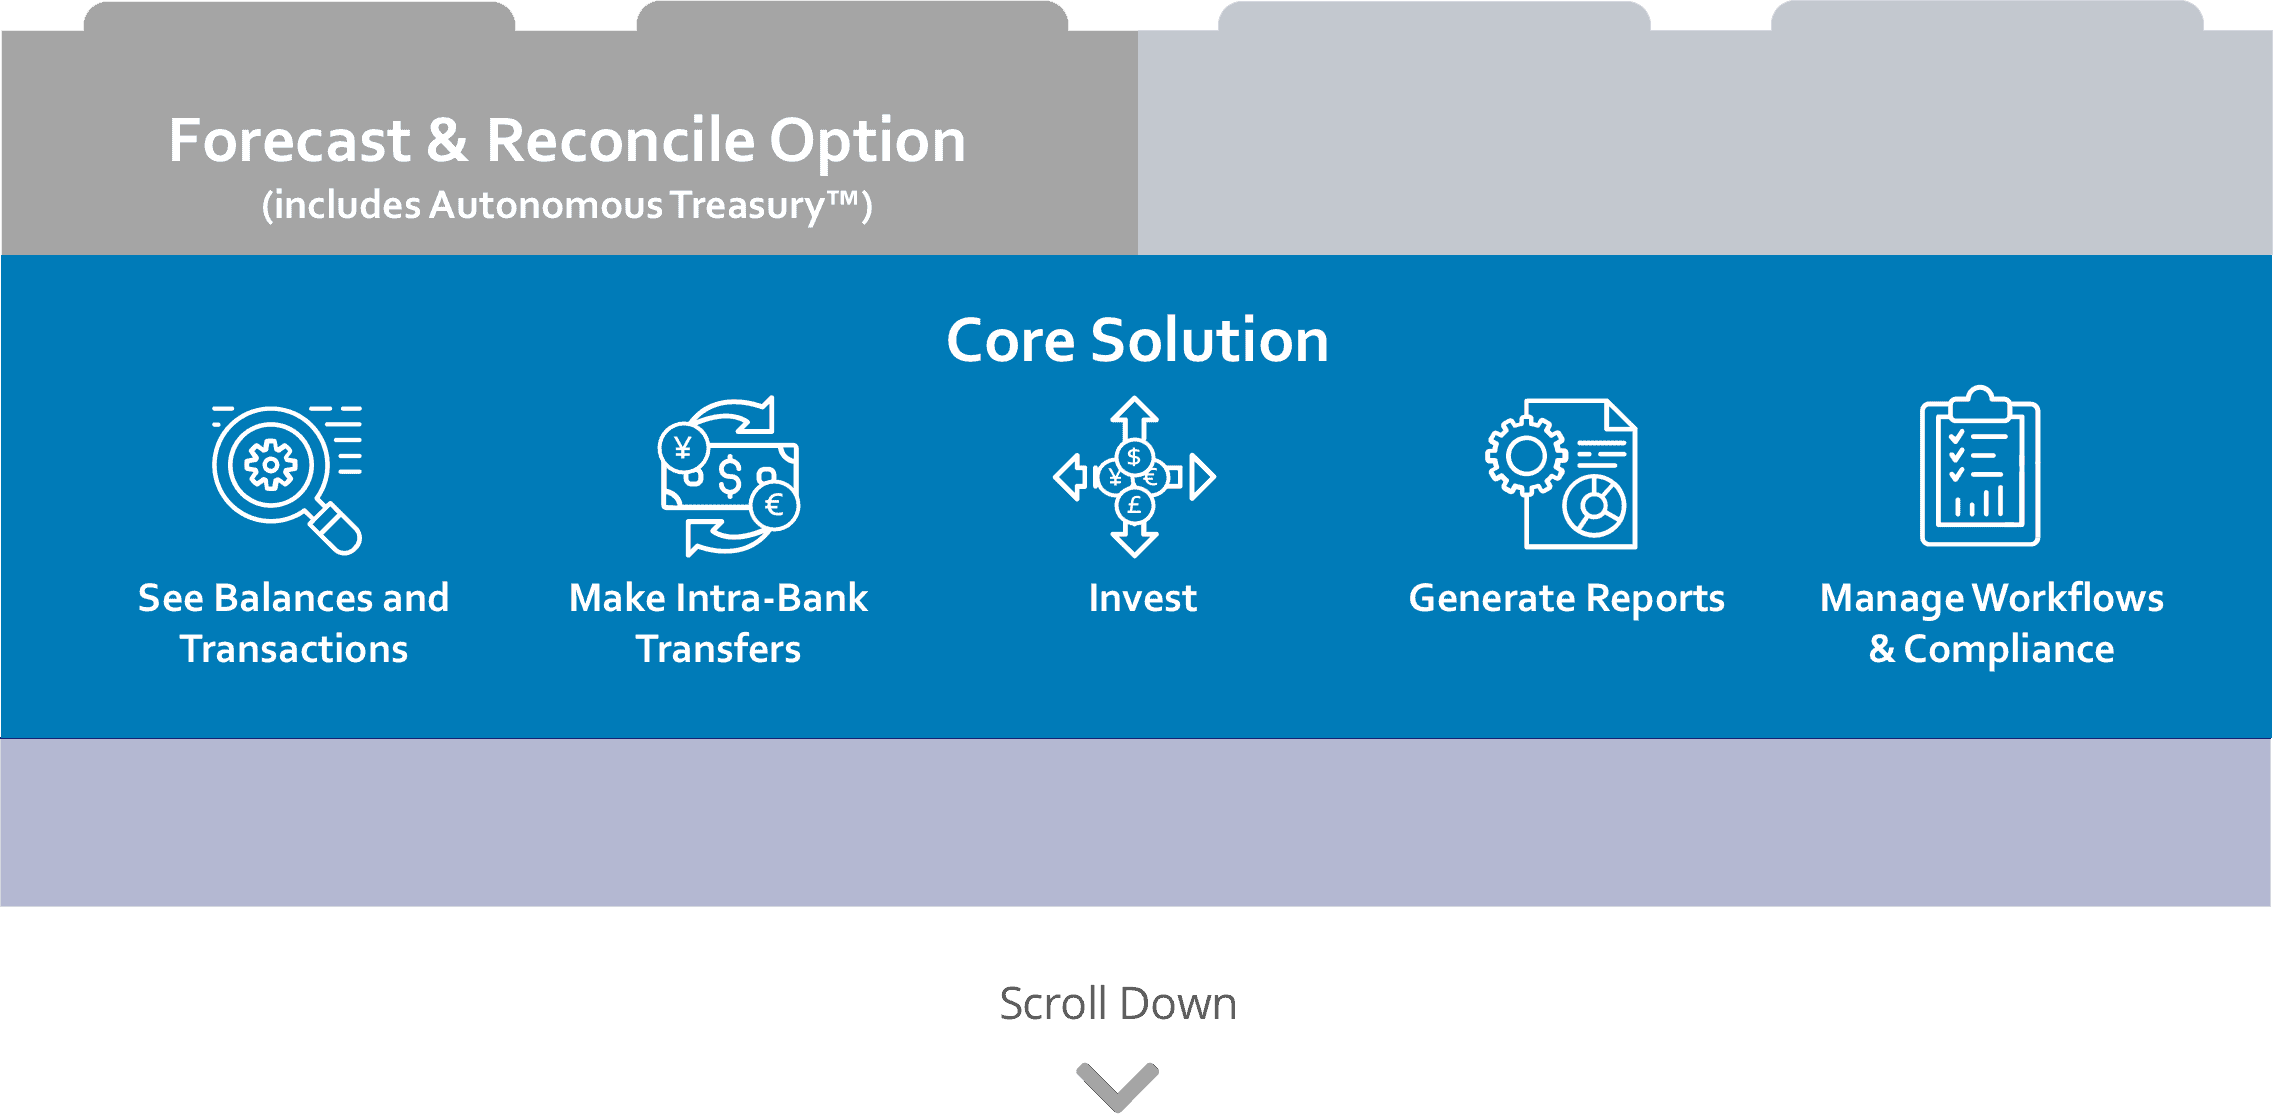 Reads "Core Solution" with 5 icons below: See balances and transaction, make intra-bank transfers, invest, generate reports, manage workflows & compliance